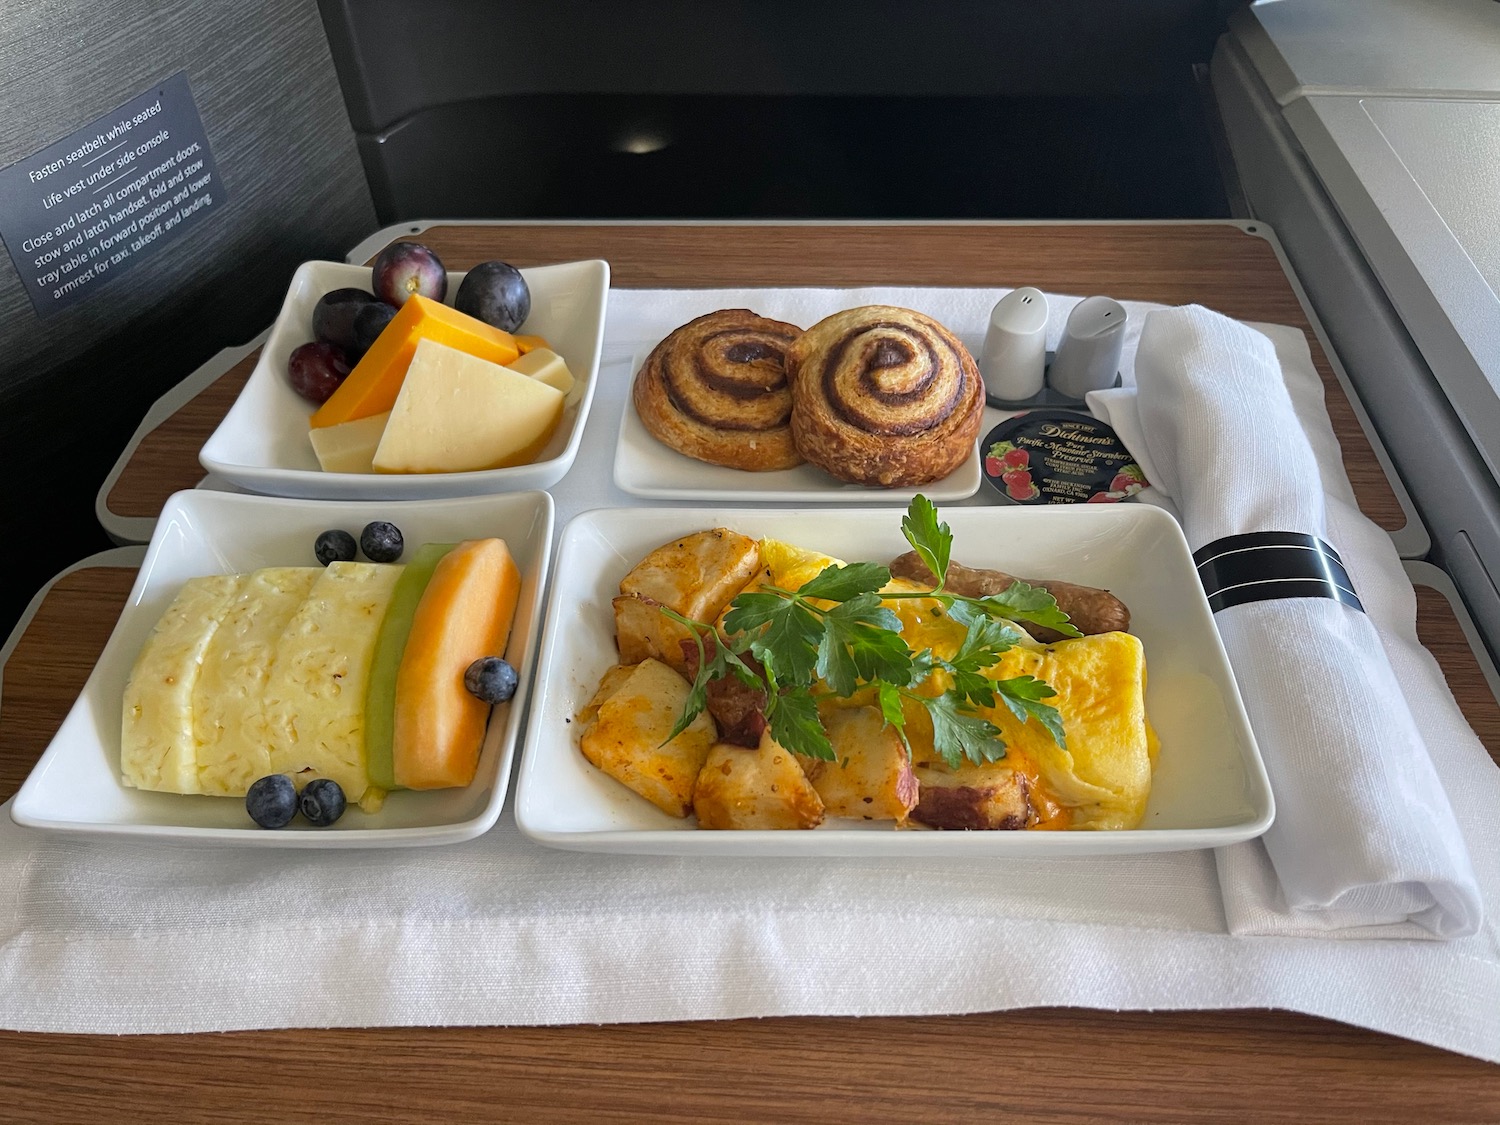 https://liveandletsfly.com/wp-content/uploads/2021/03/Business-Class-Breakfast-American-vs-United-Airlines-16.jpeg